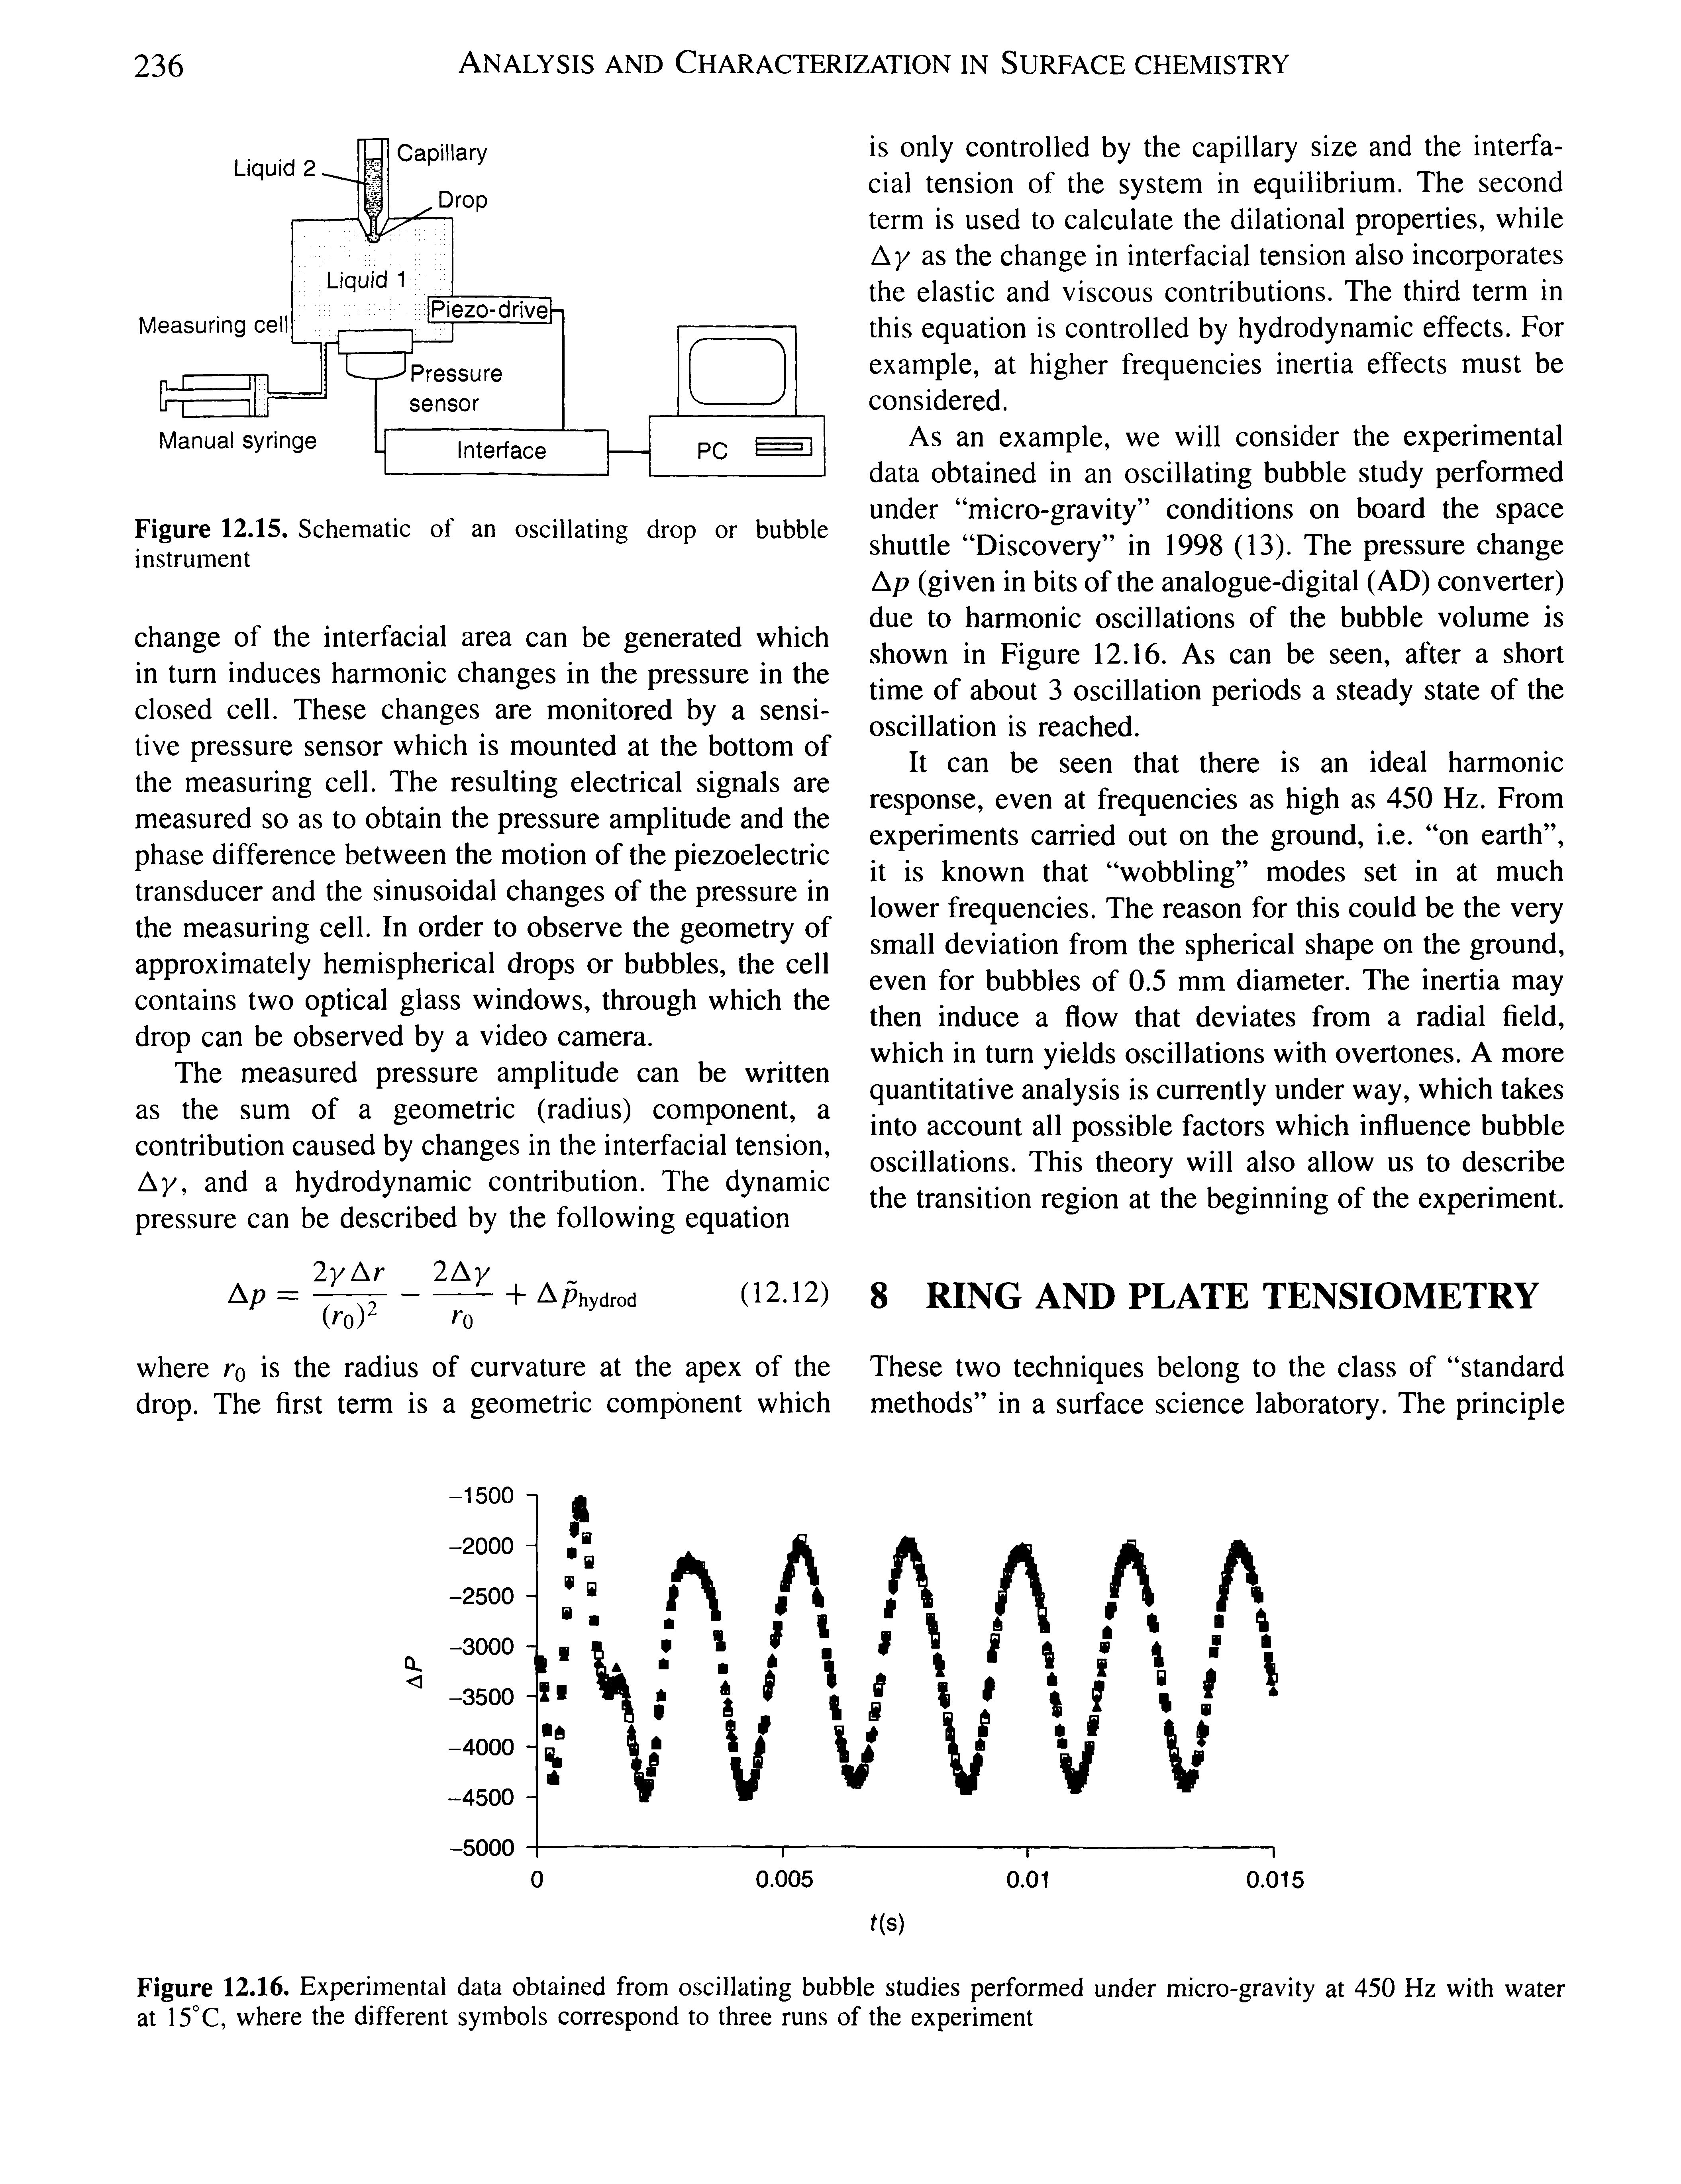 Figure 12.16. Experimental data obtained from oscillating bubble studies performed under micro-gravity at 450 Hz with water at 15°C, where the different symbols correspond to three runs of the experiment...